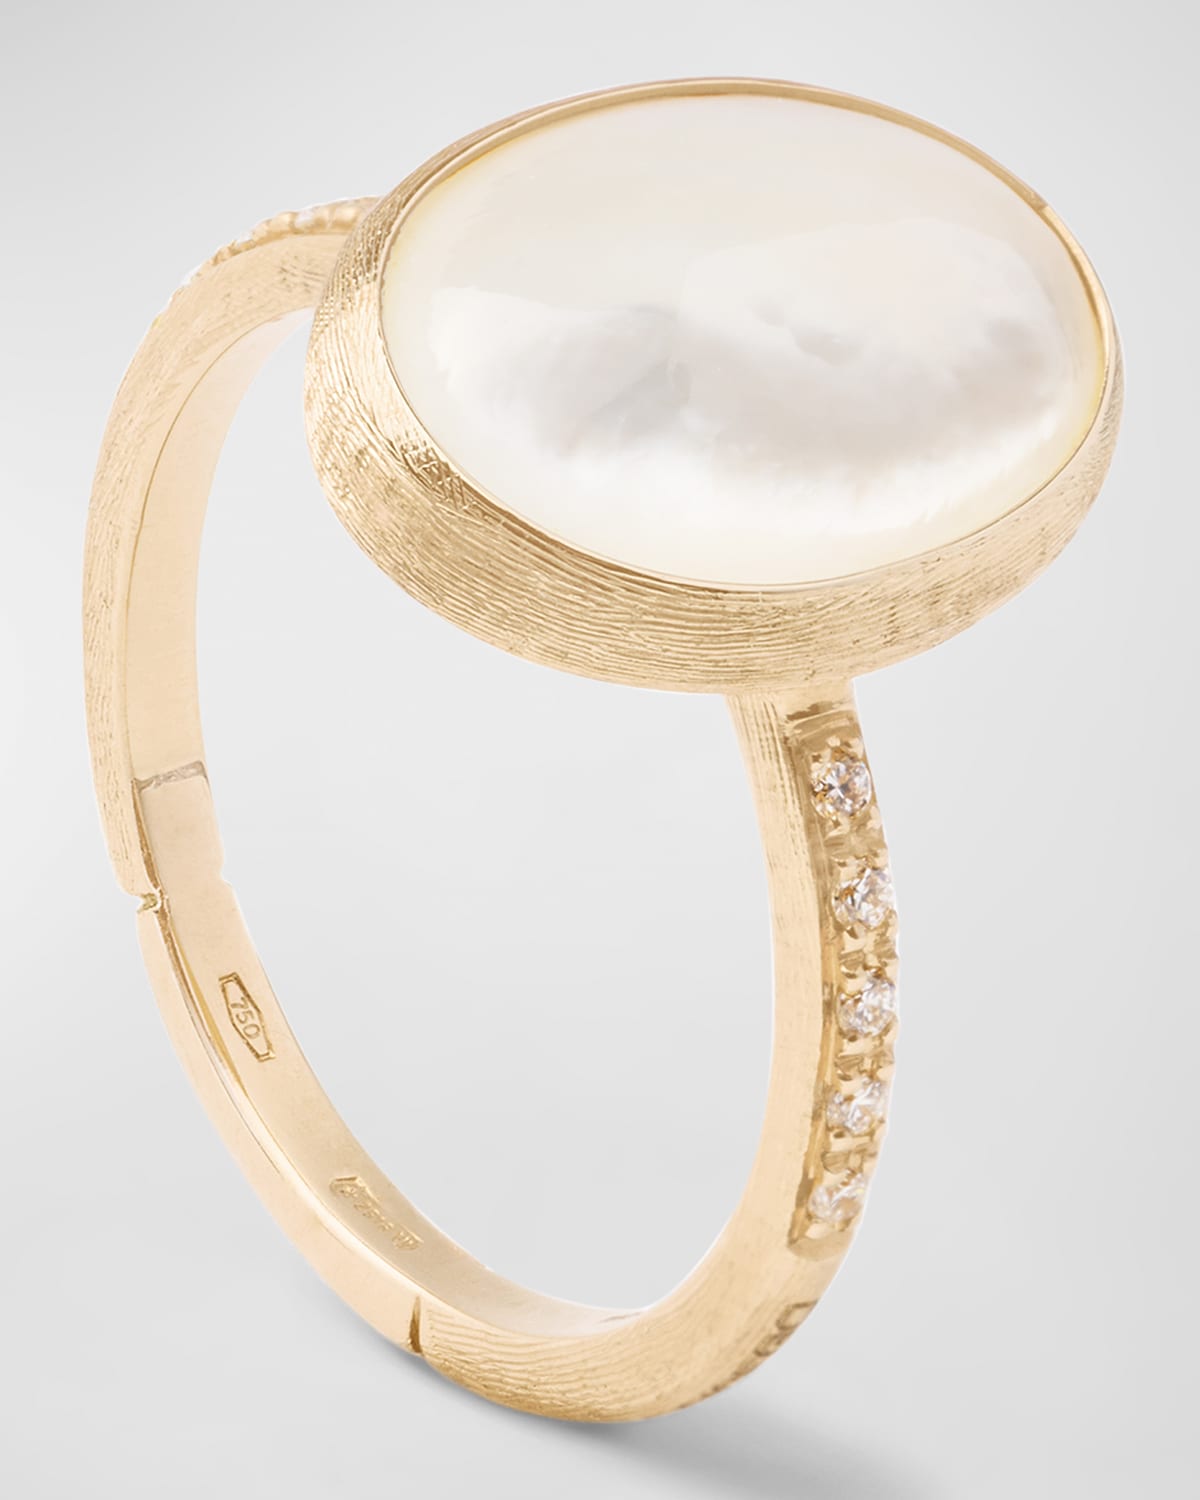 MARCO BICEGO 18K SIVIGLIA MOTHER-OF-PEARL RING WITH WHITE DIAMONDS